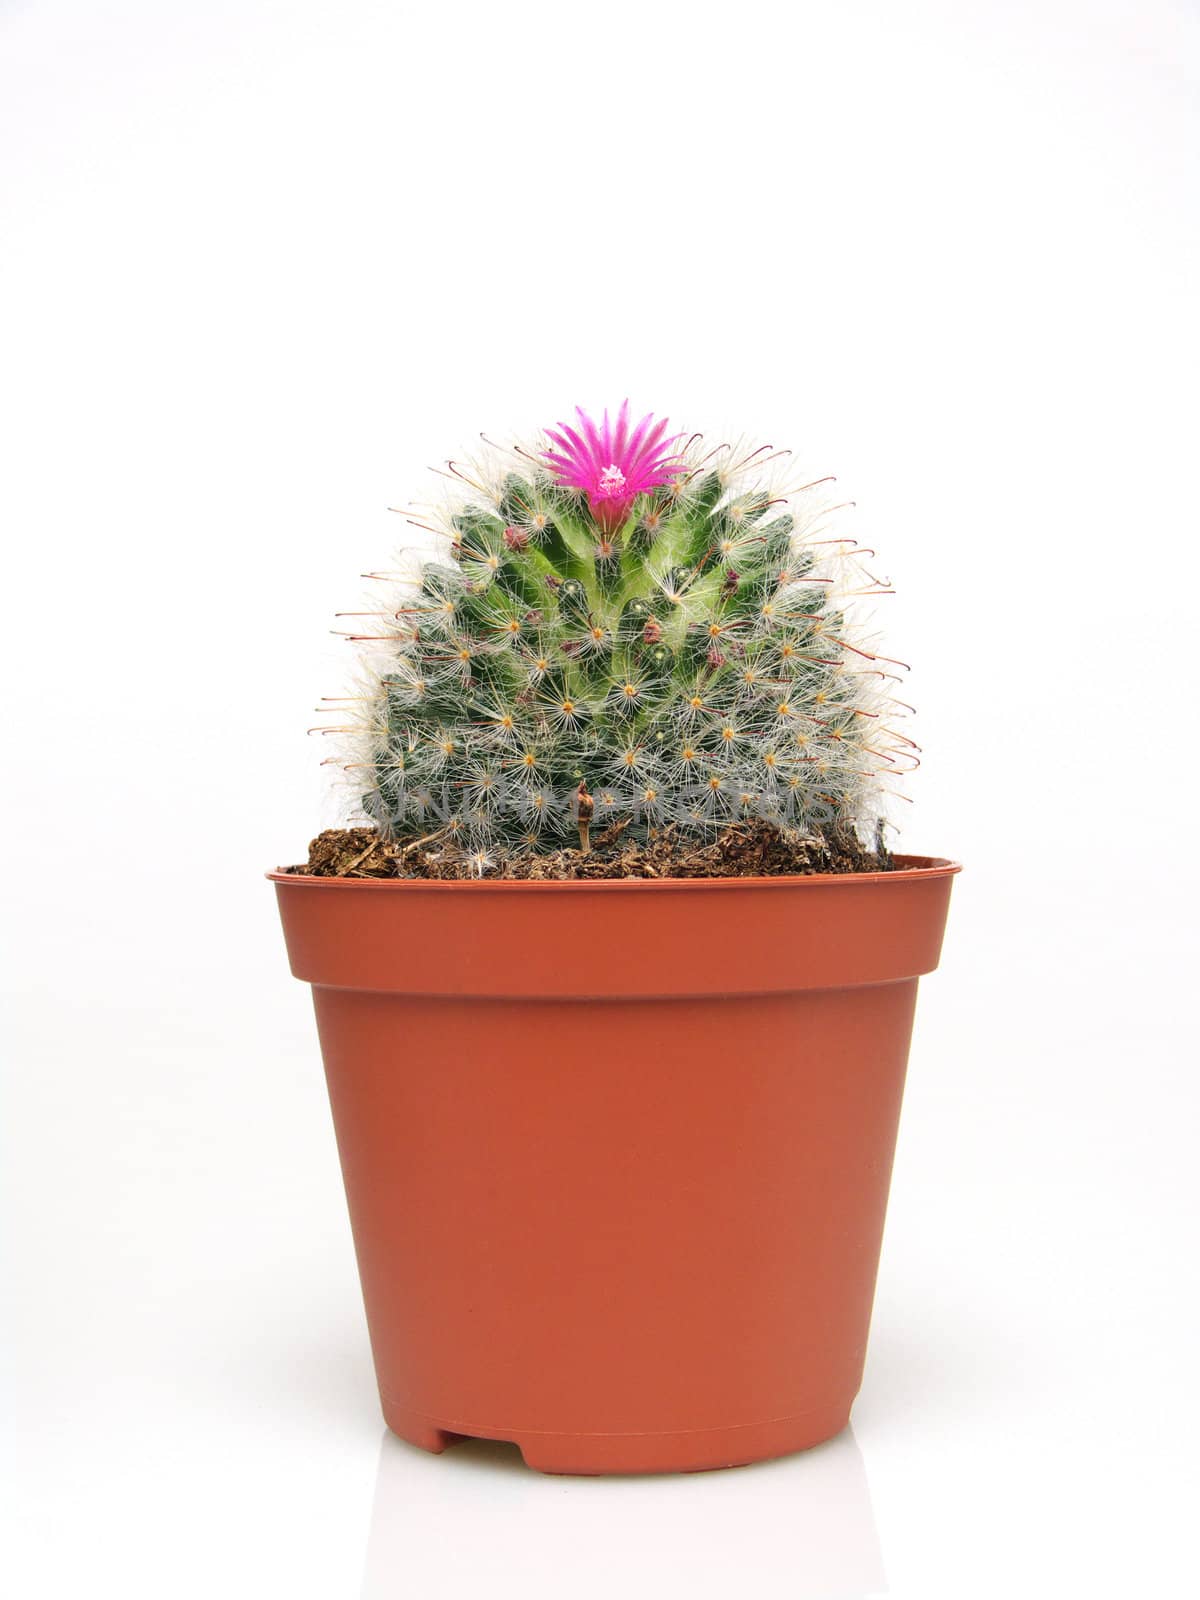 Blossoming cactus in a pot by oneo